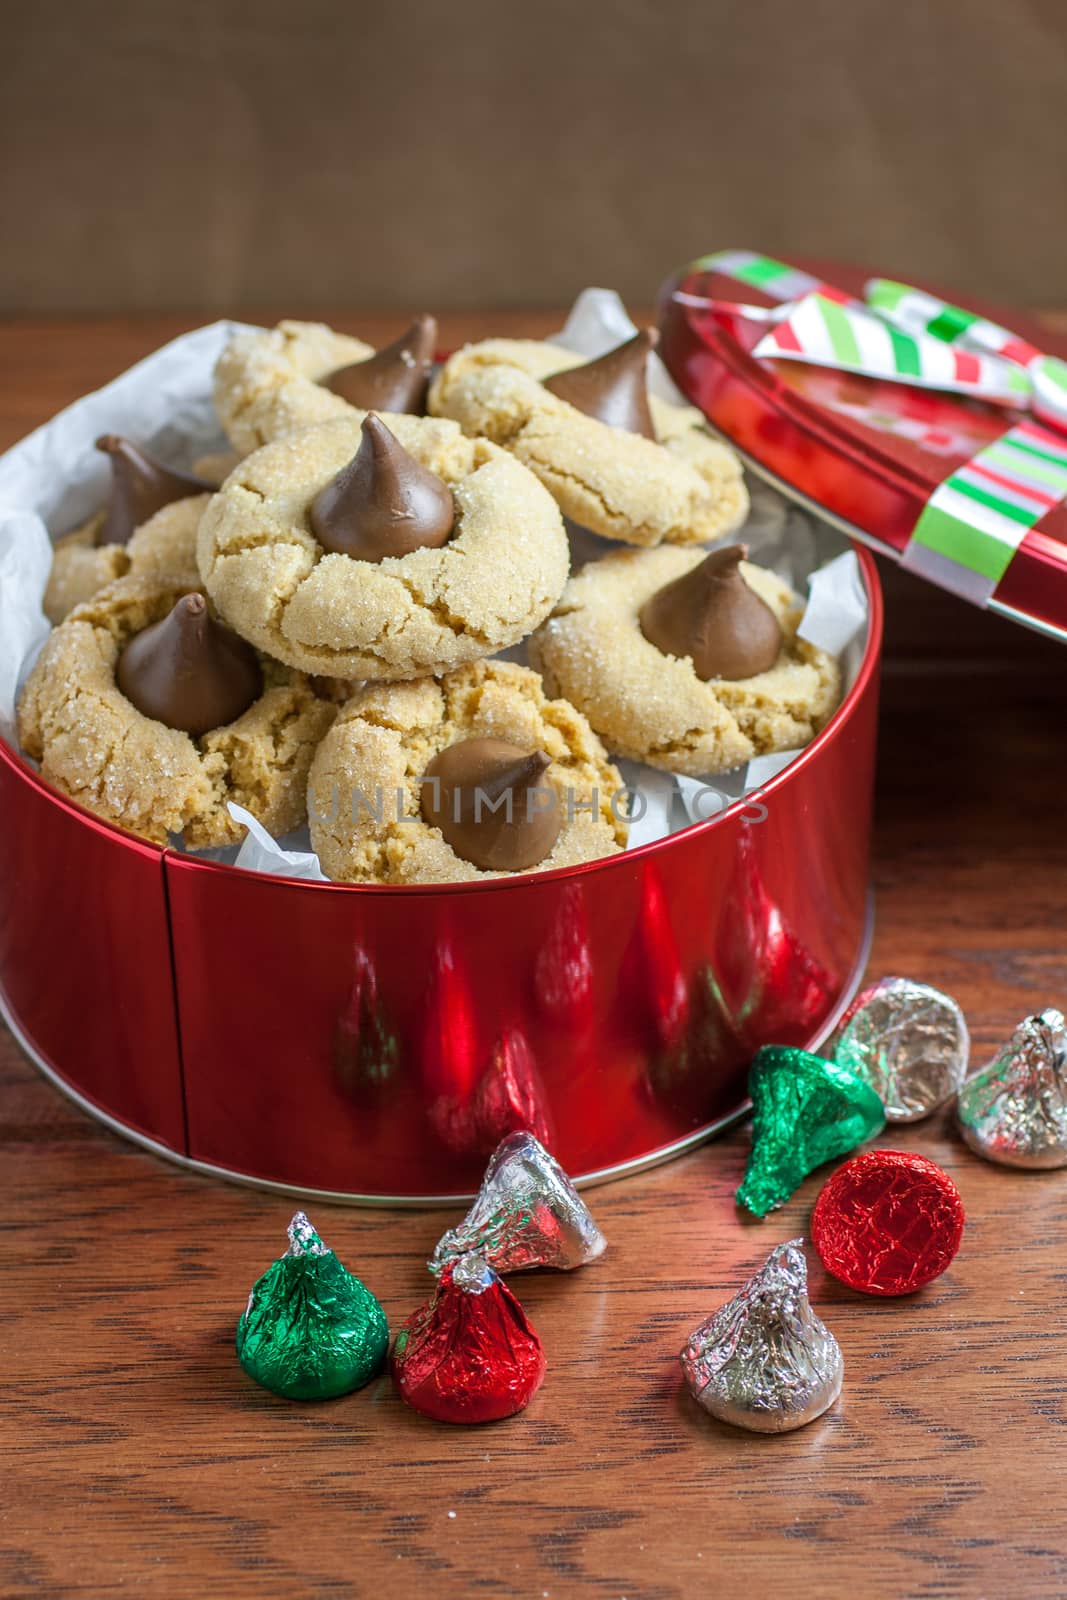 Preanut butter blossoms in a gift tin, highlighted with chocolate candies and and cookies on a wooden table.